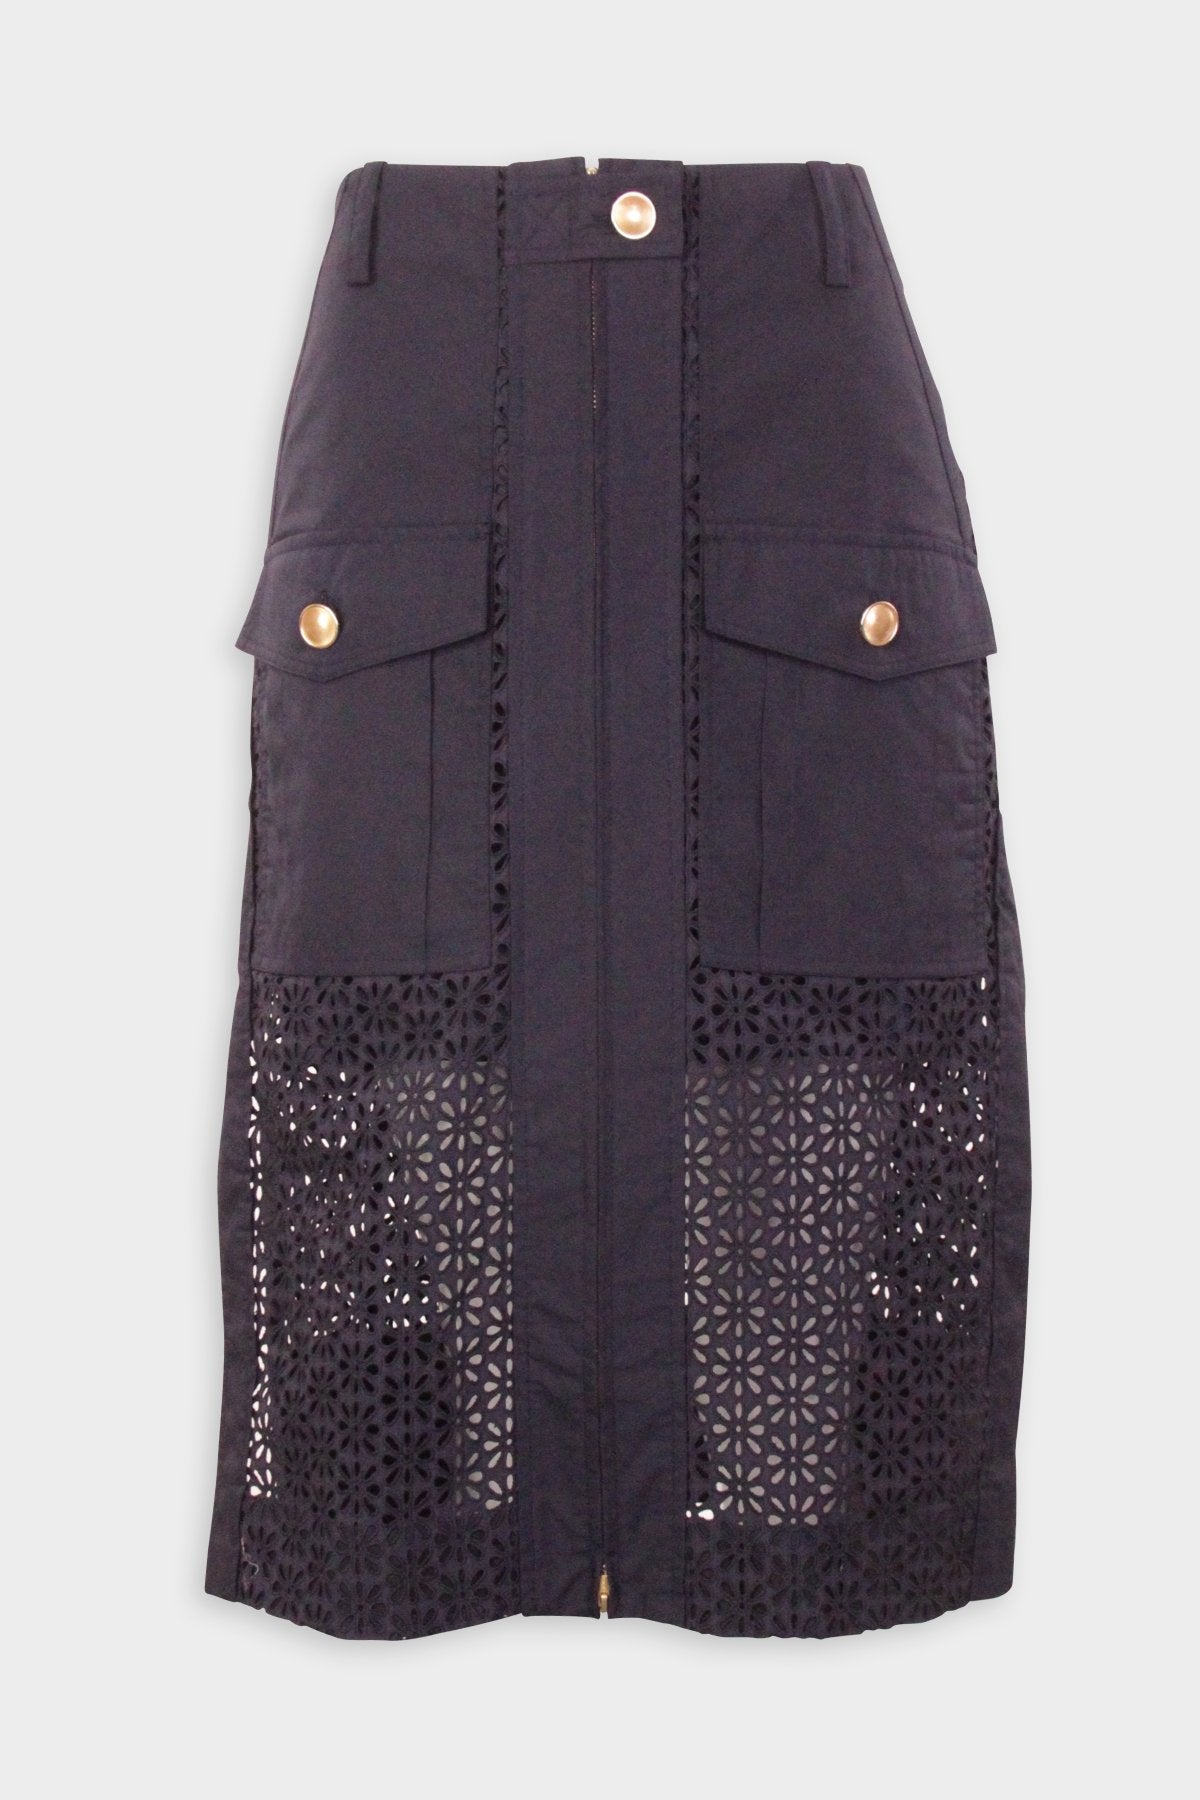 Broderie Anglaise Utility Skirt in Midnight - shop-olivia.com